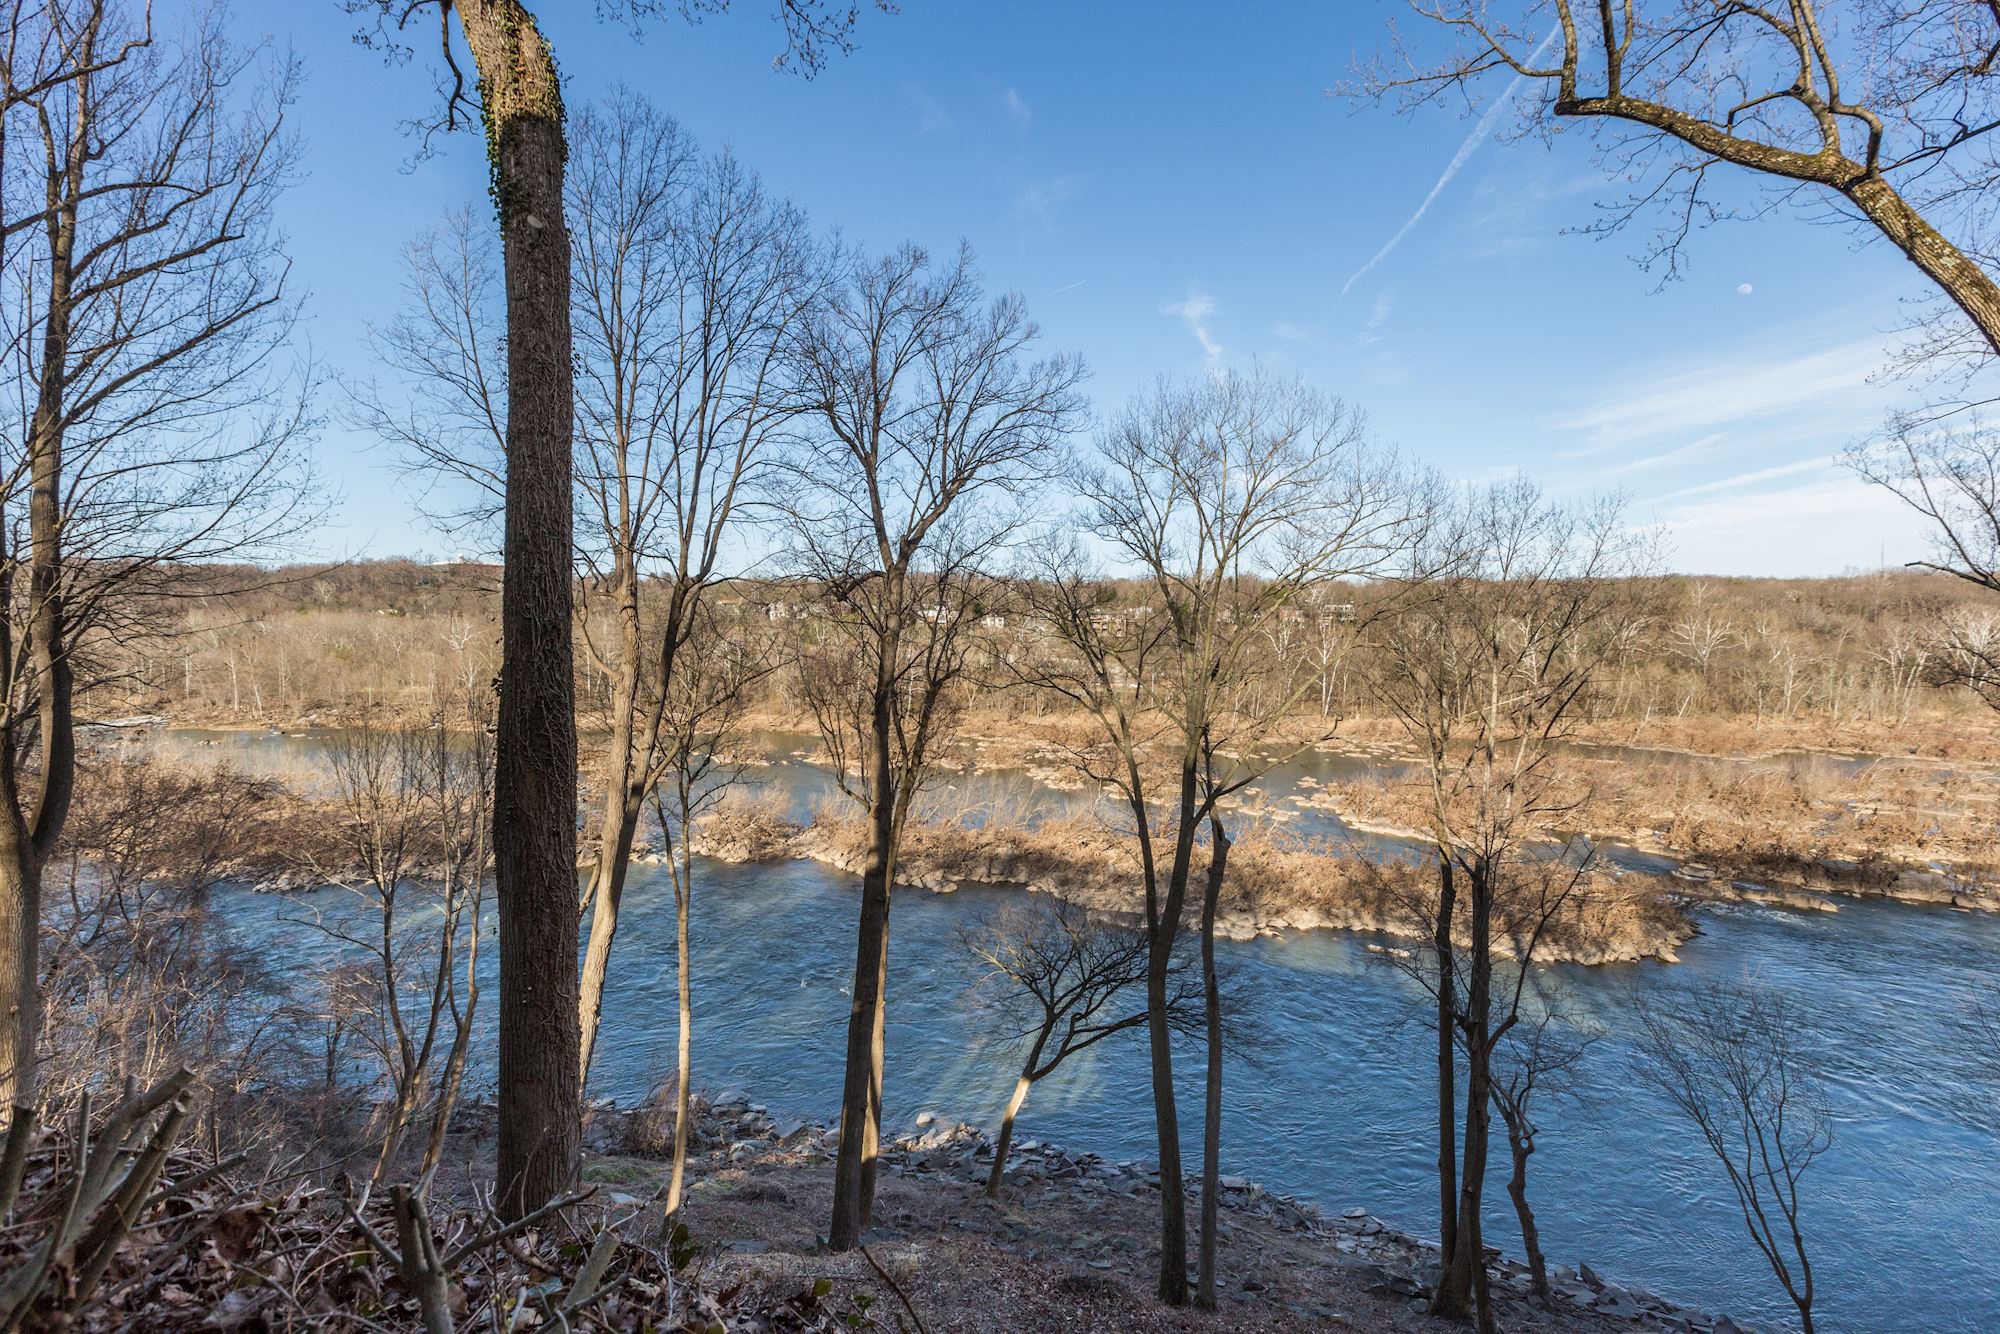 Views of the Potomac River from the property